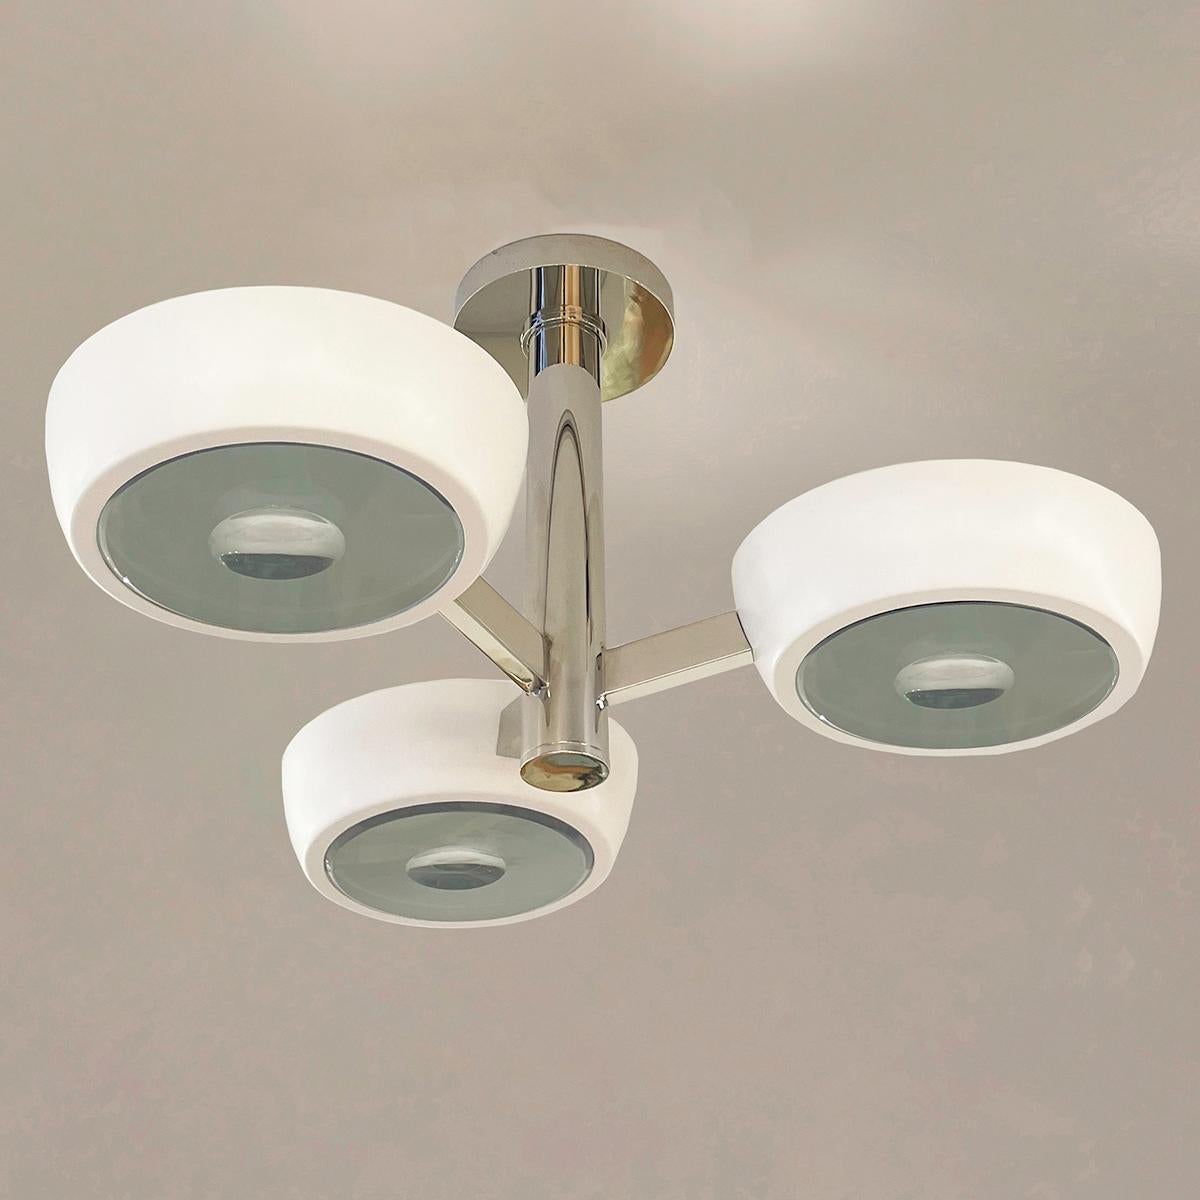 Modern Rose Piccolo Ceiling Light by Gaspare Asaro- Green Glass and Polished Nickel For Sale